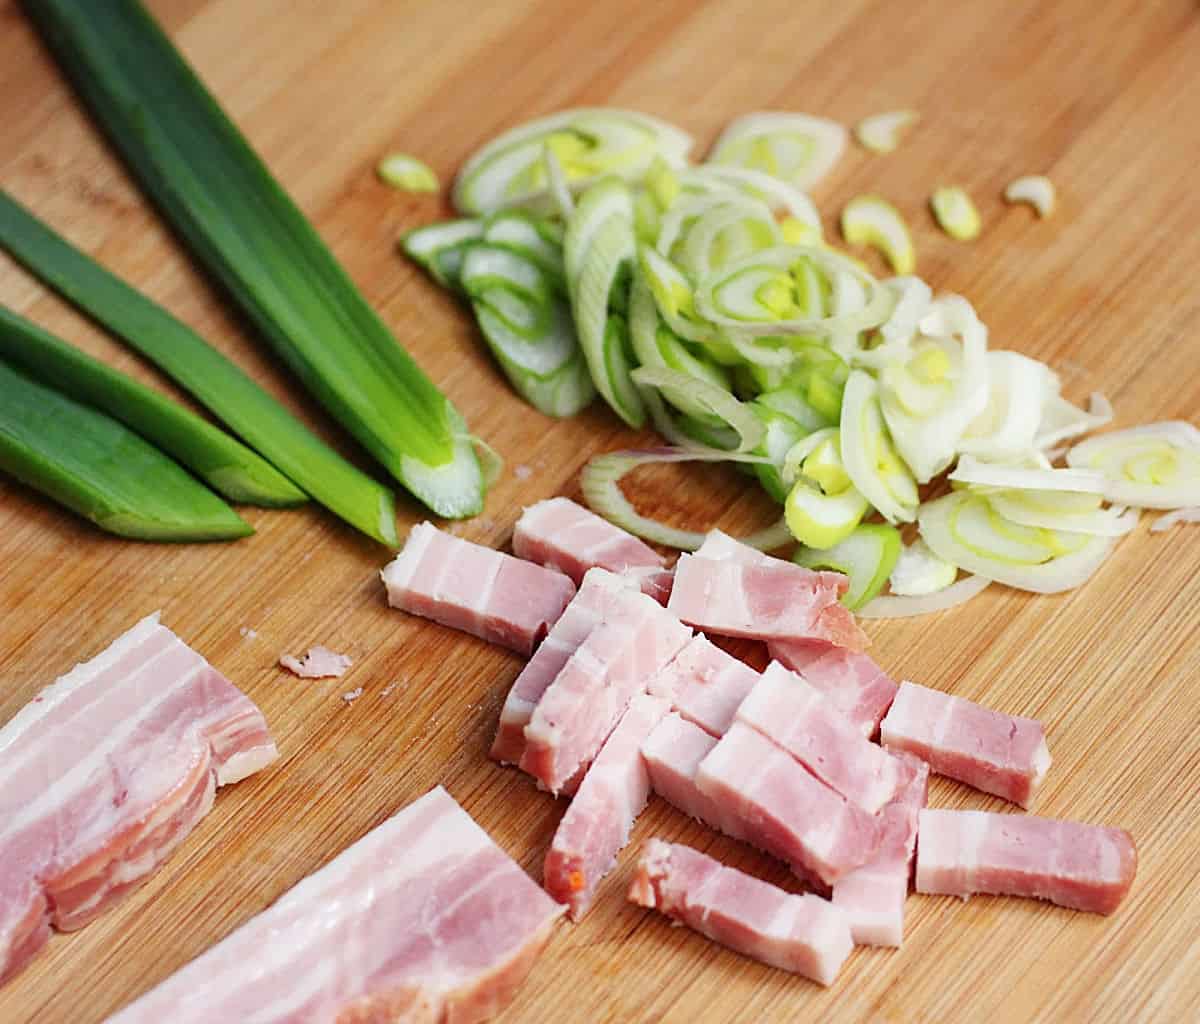 Wooden board with bacon strips and sliced green onion.